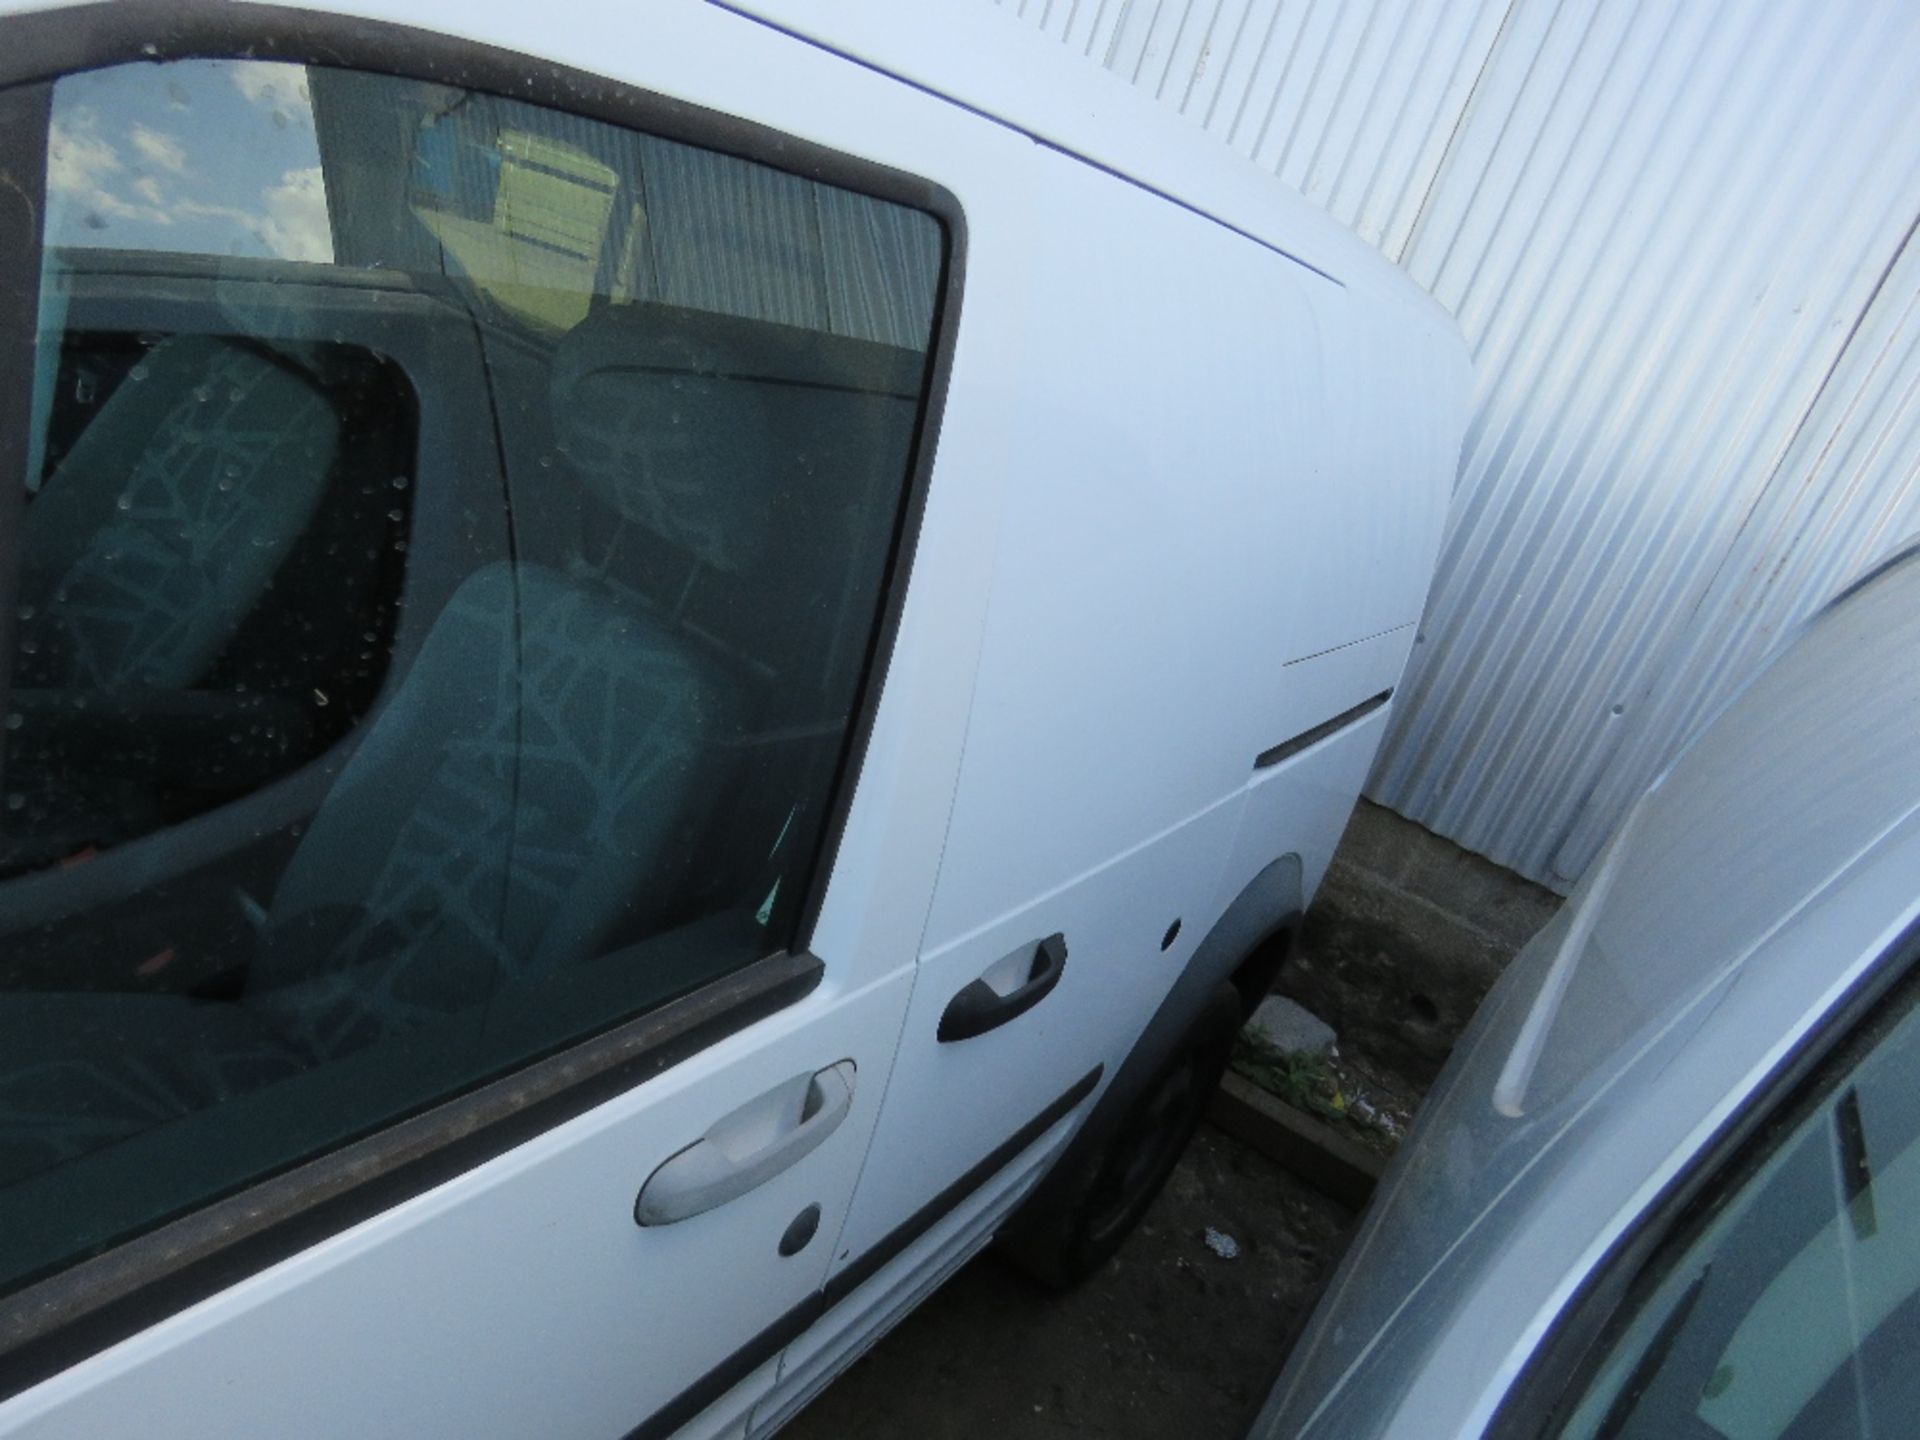 FORD TRANSIT CONNECT PANEL VAN 122,255 REC MILES, WITH AIR CON. REG:AV12 OFZ WITH V5. TESTED TILL 3 - Image 8 of 8